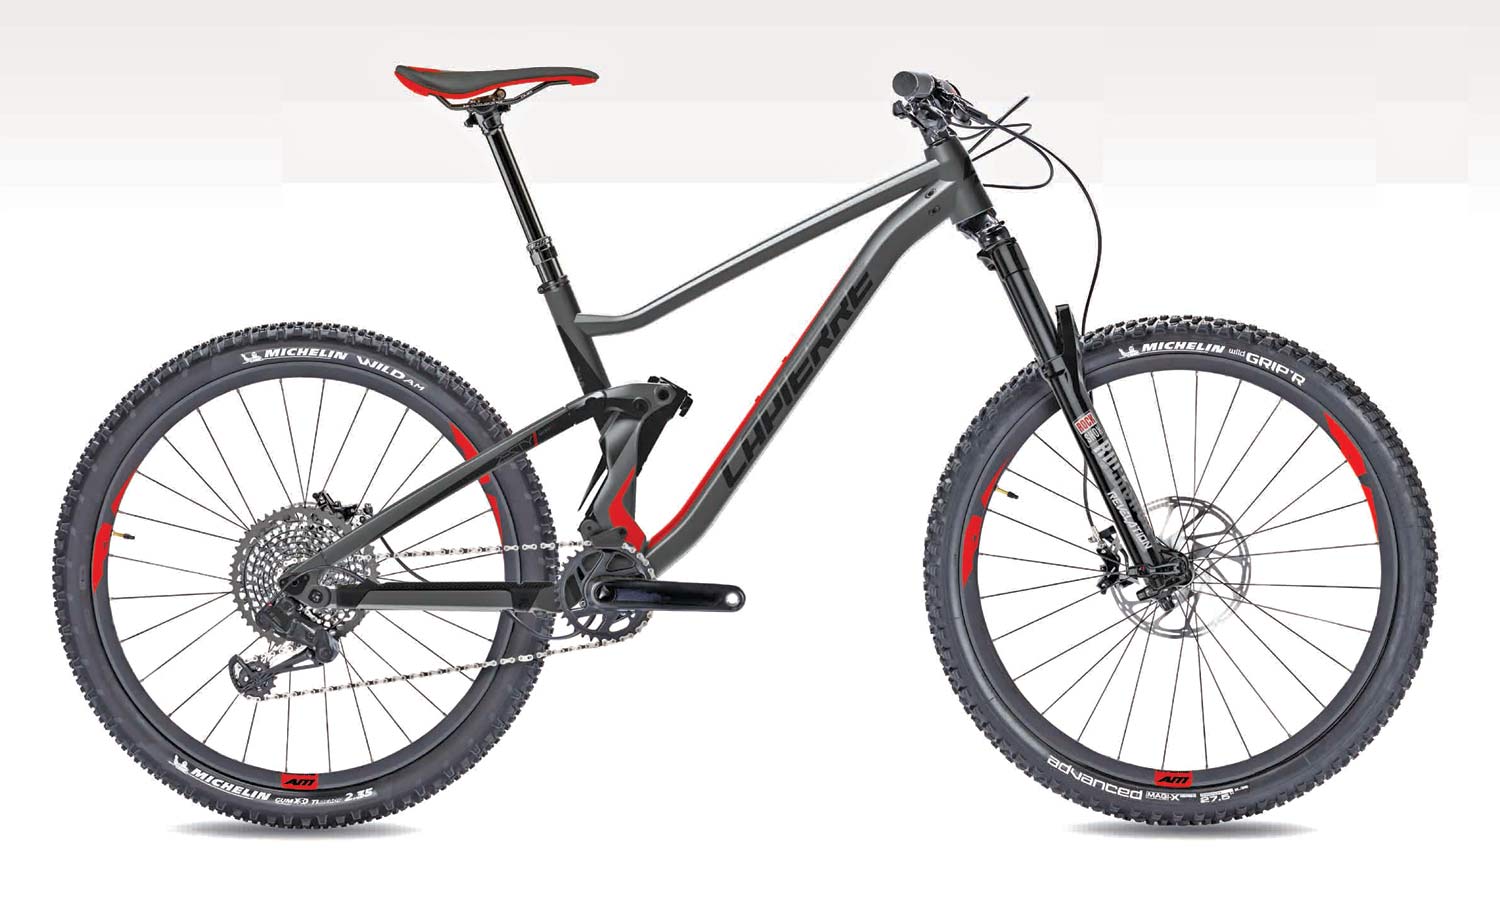 2019 Lapierre Zesty & Spicy: one frame for AM or enduro